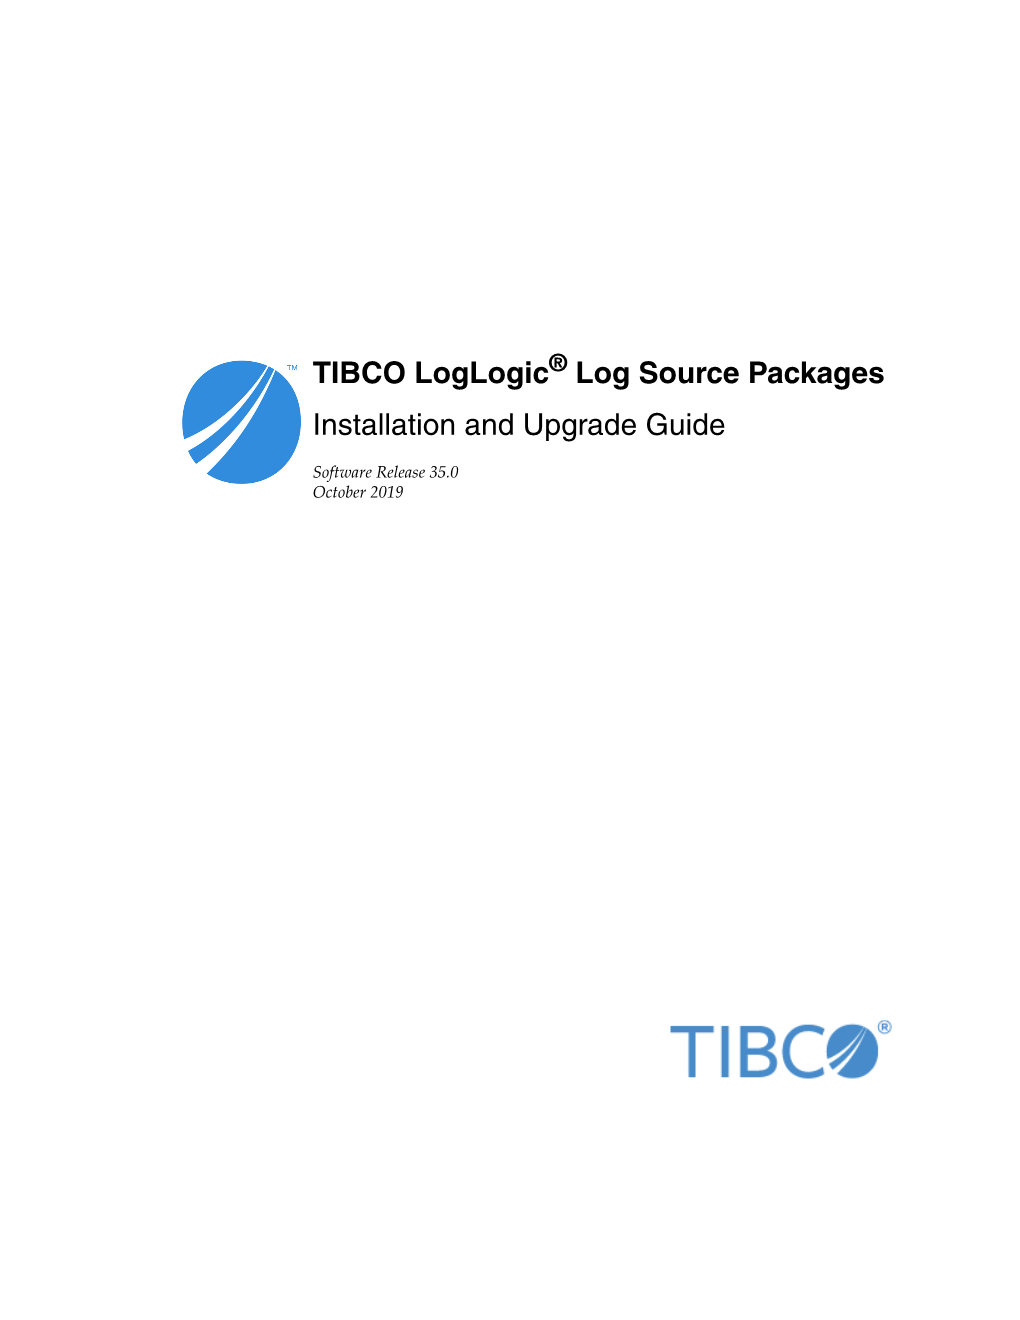 TIBCO Loglogic® Log Source Packages Installation and Upgrade Guide